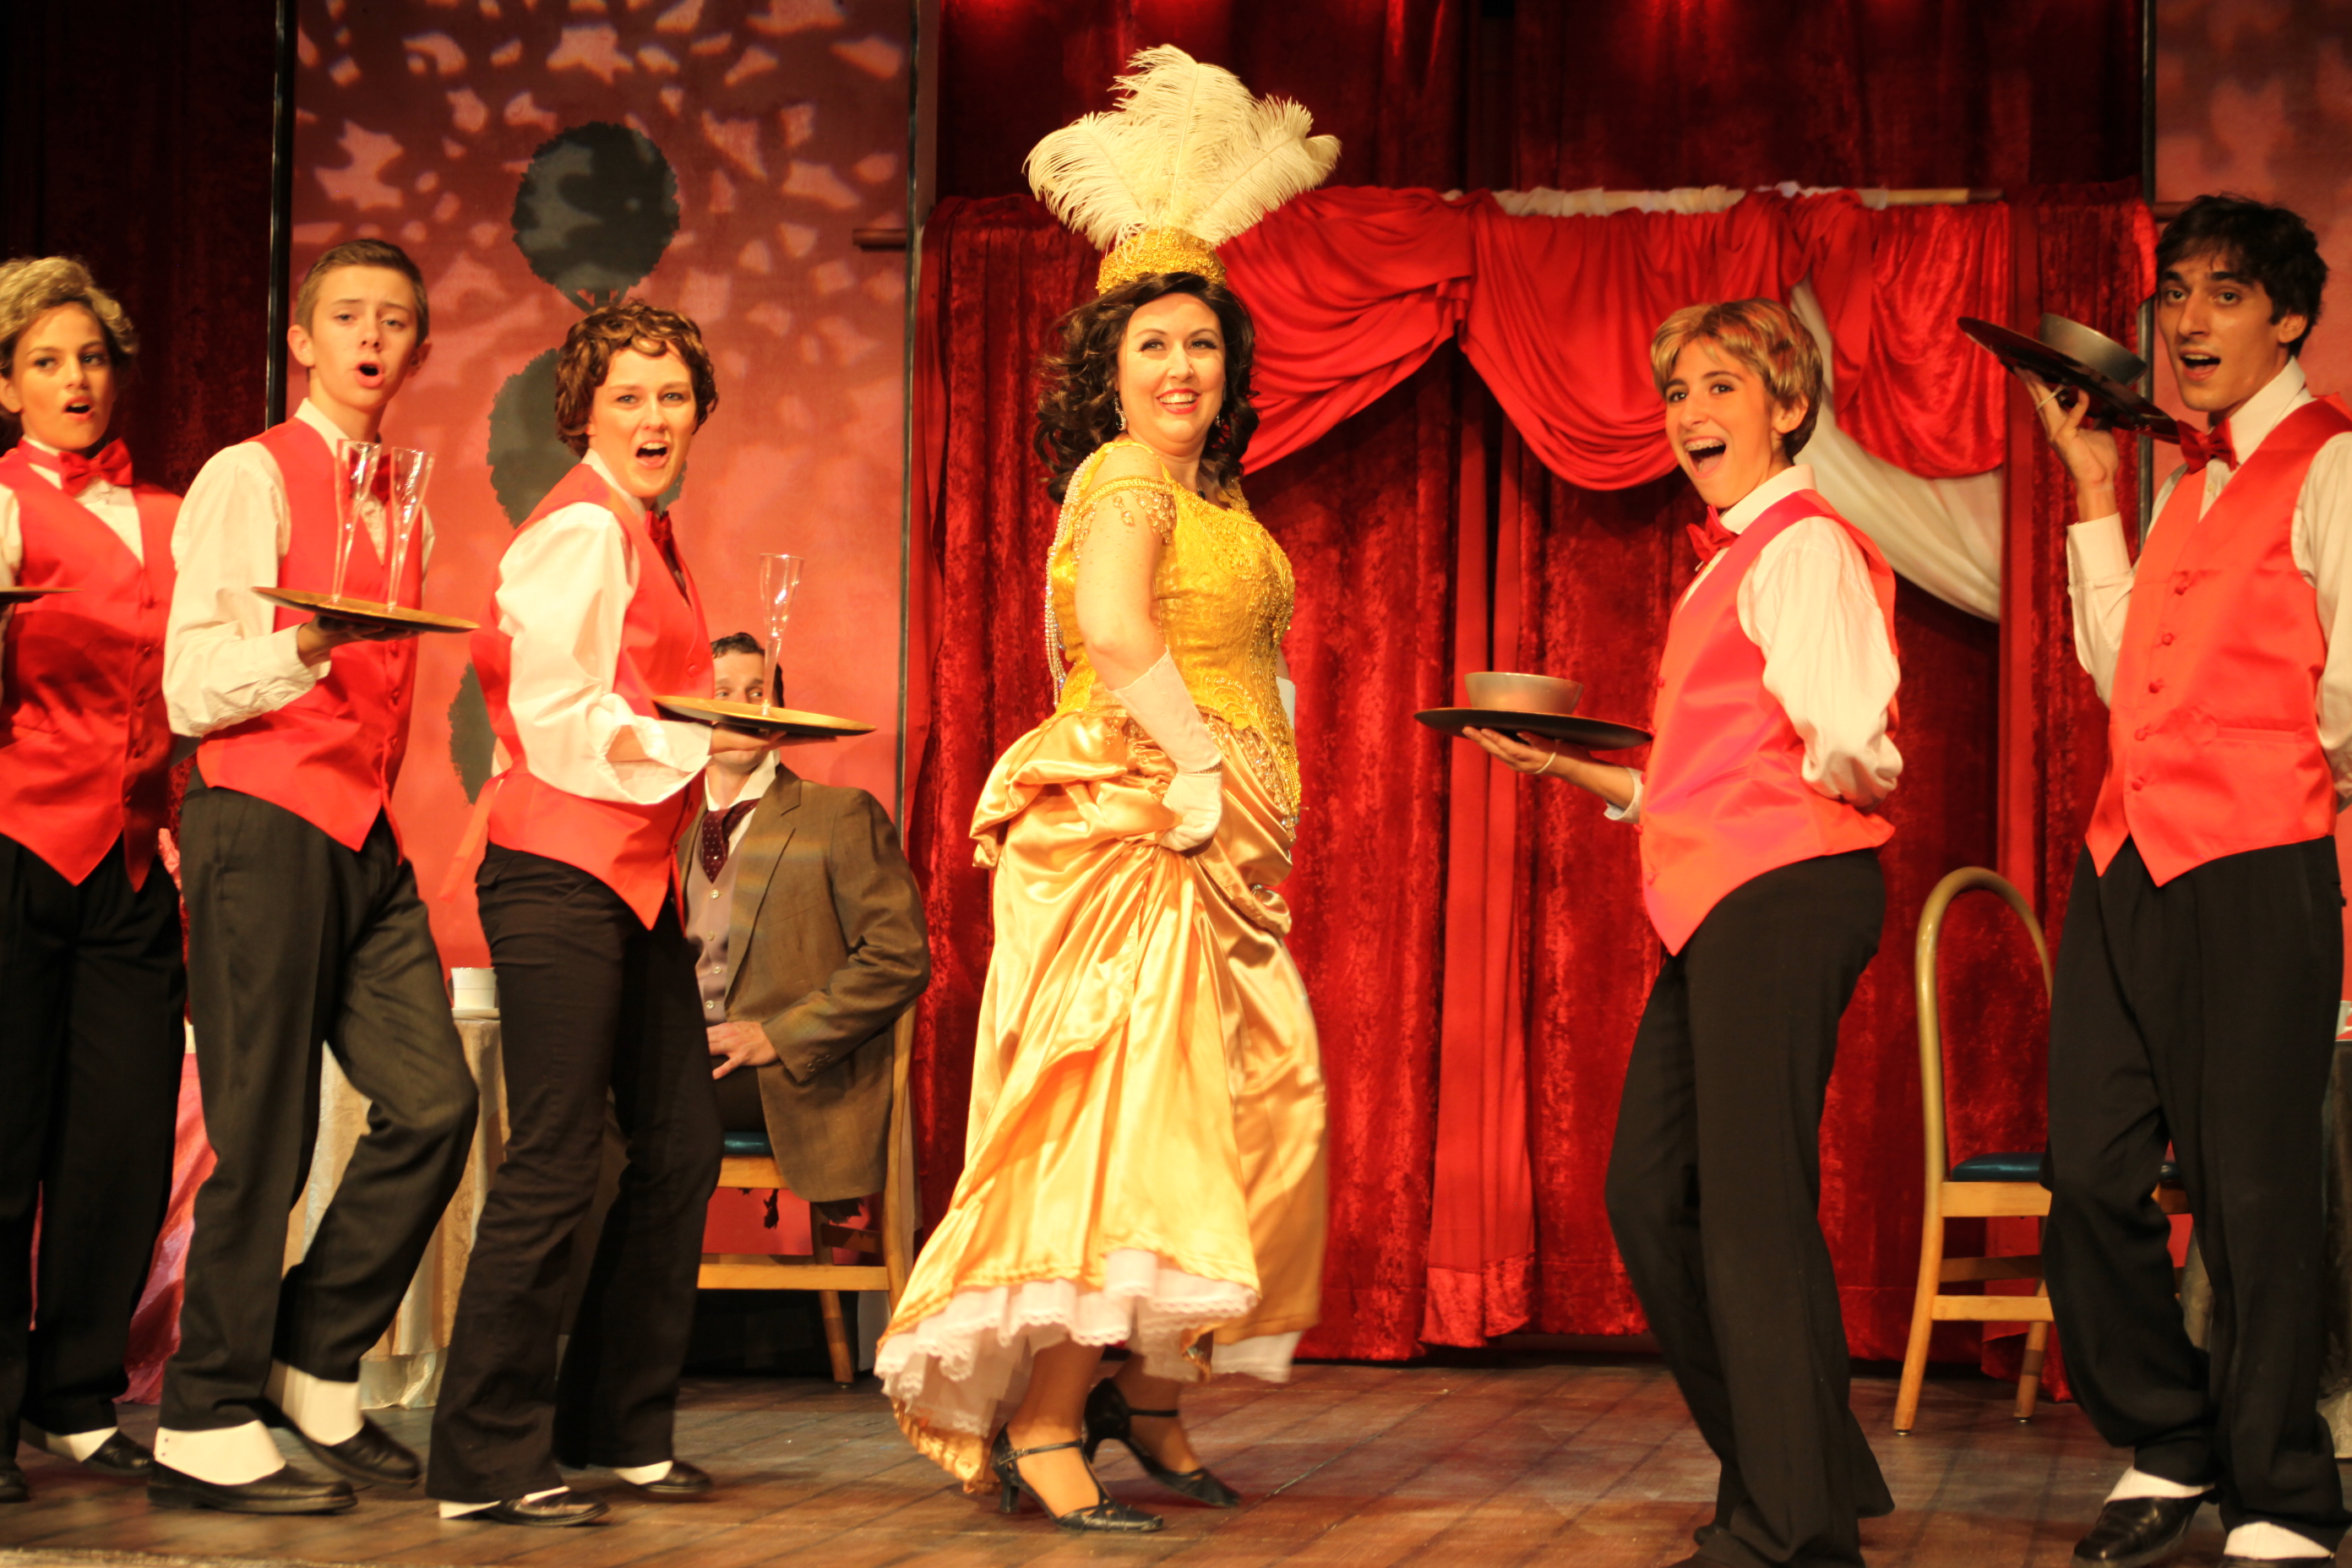 Kristin Pidcock, center, plays Dolly Levi in Hello, Dolly at Limelight Theatre, on stage June 5 through July 5 on the Matuza Main Stage. Photos by Renee Unsworth